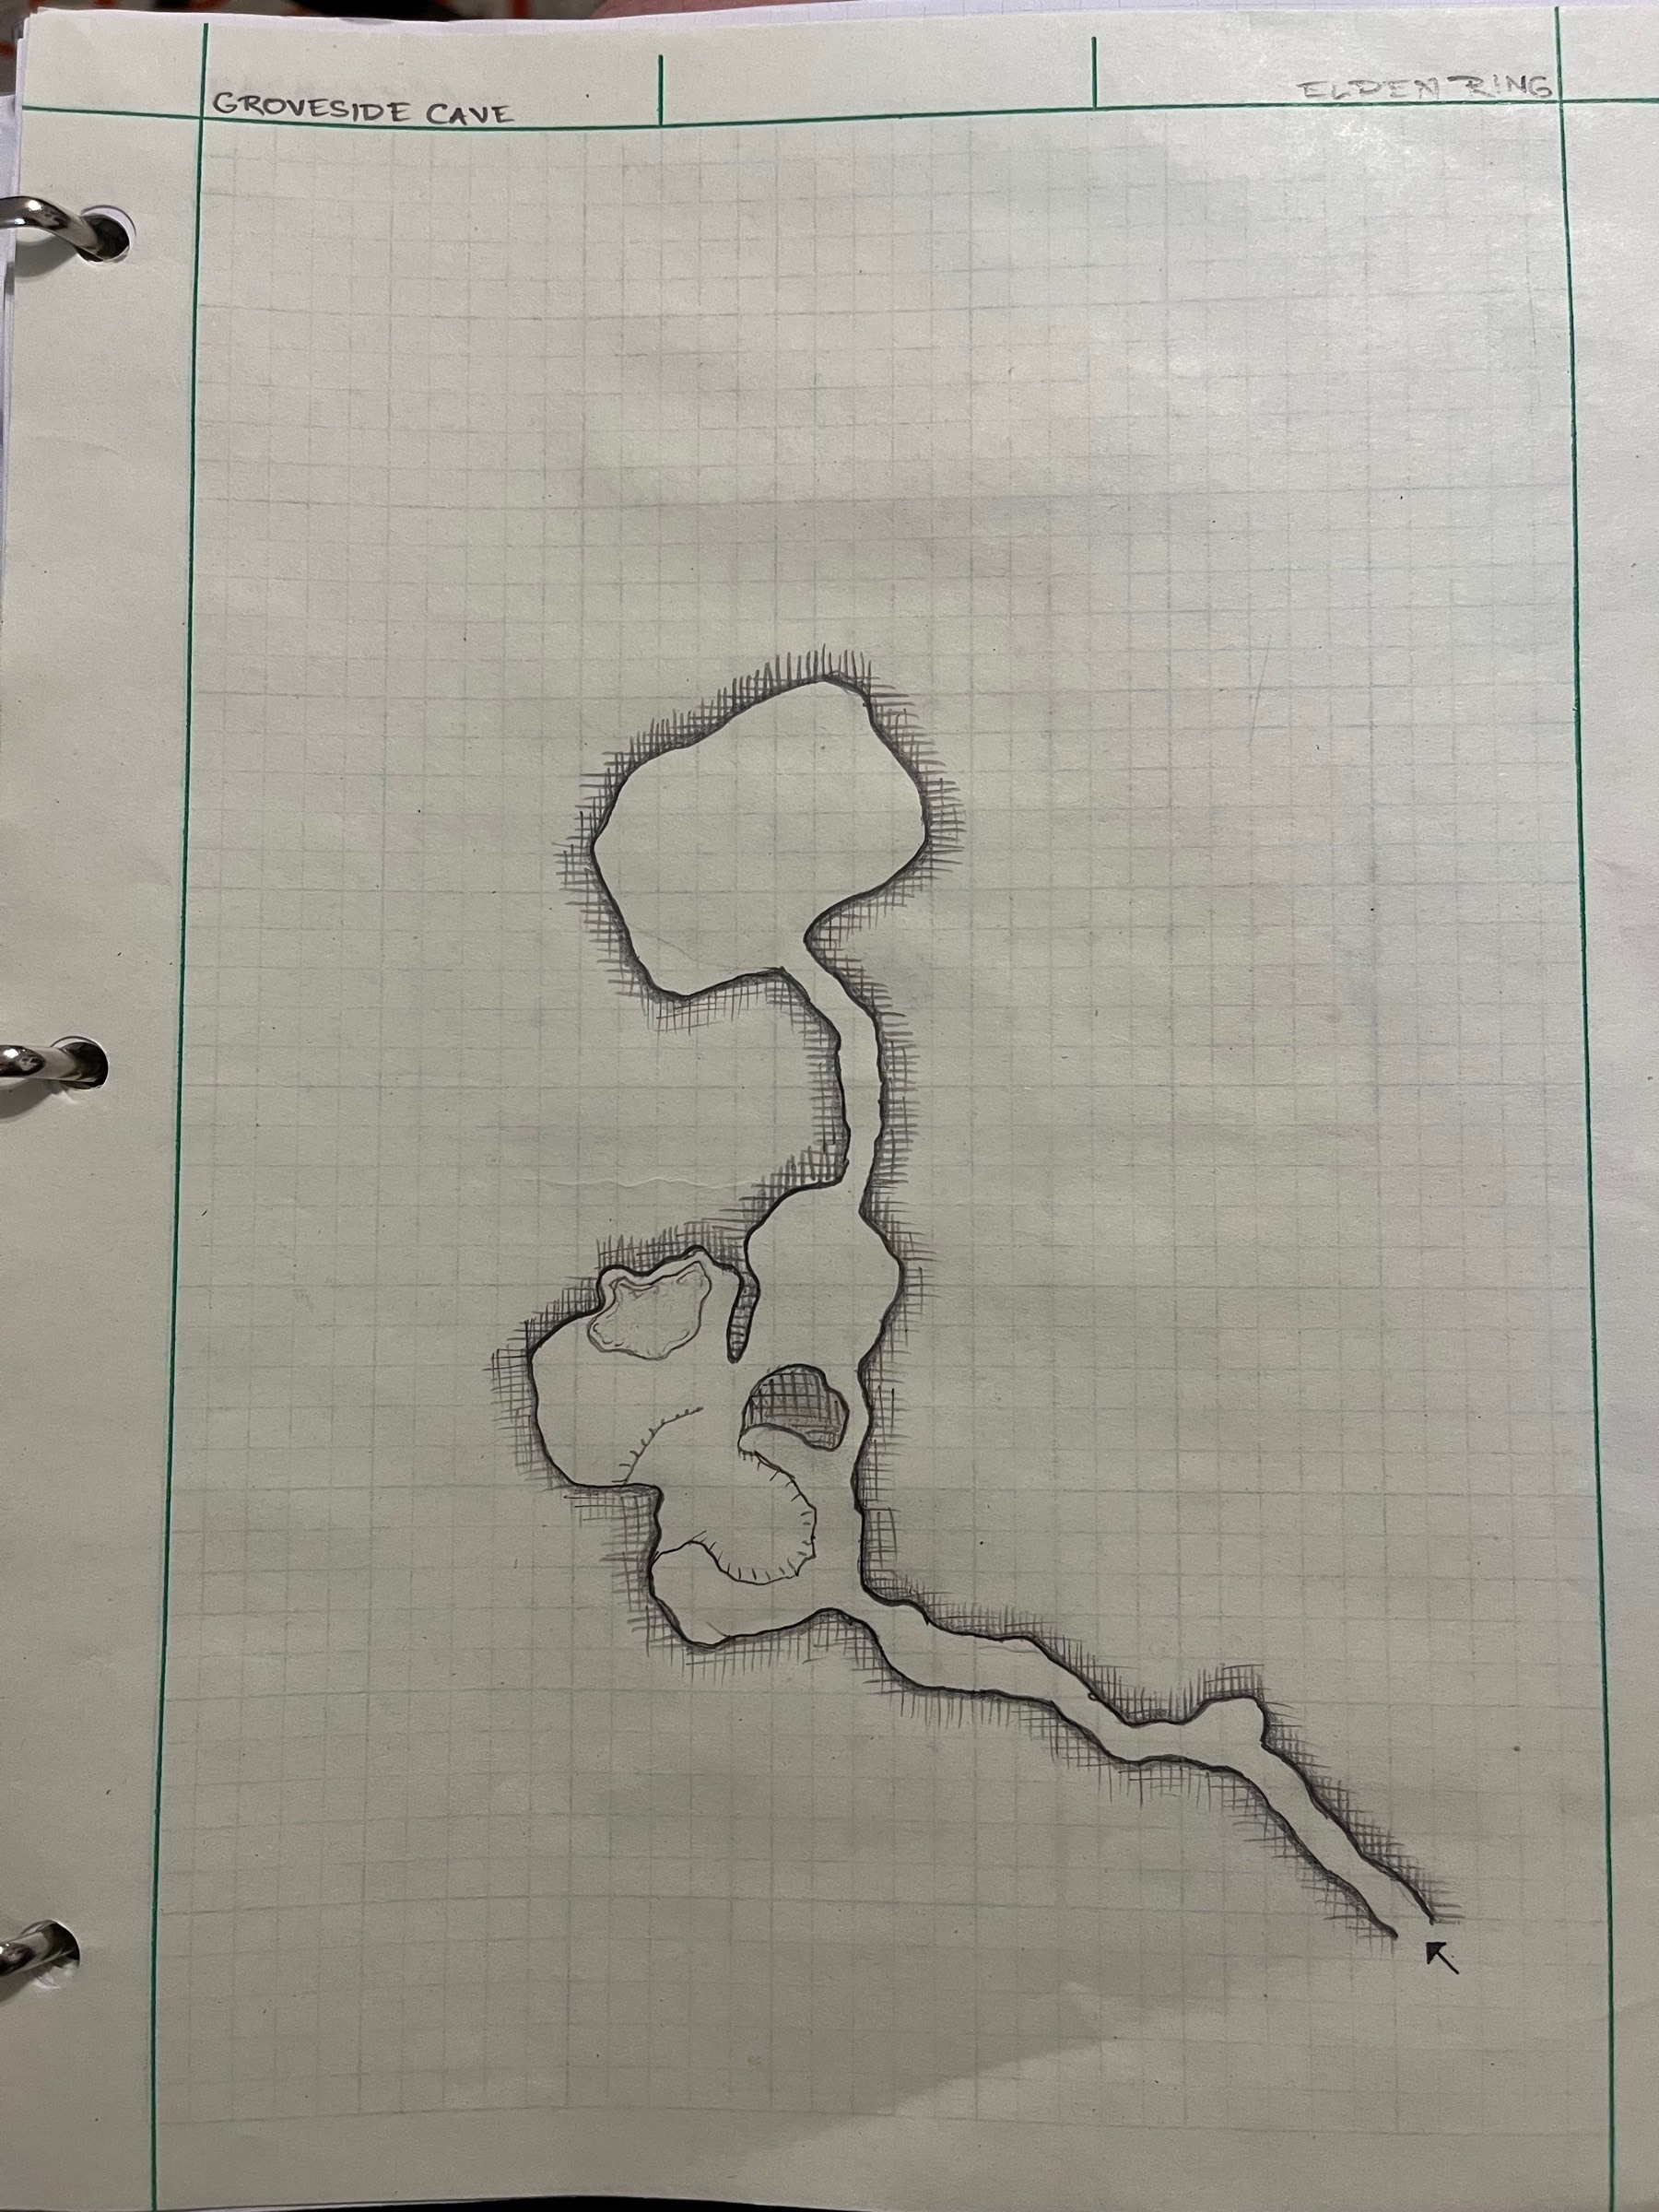 A hand-drawn map of Groveside Cave.